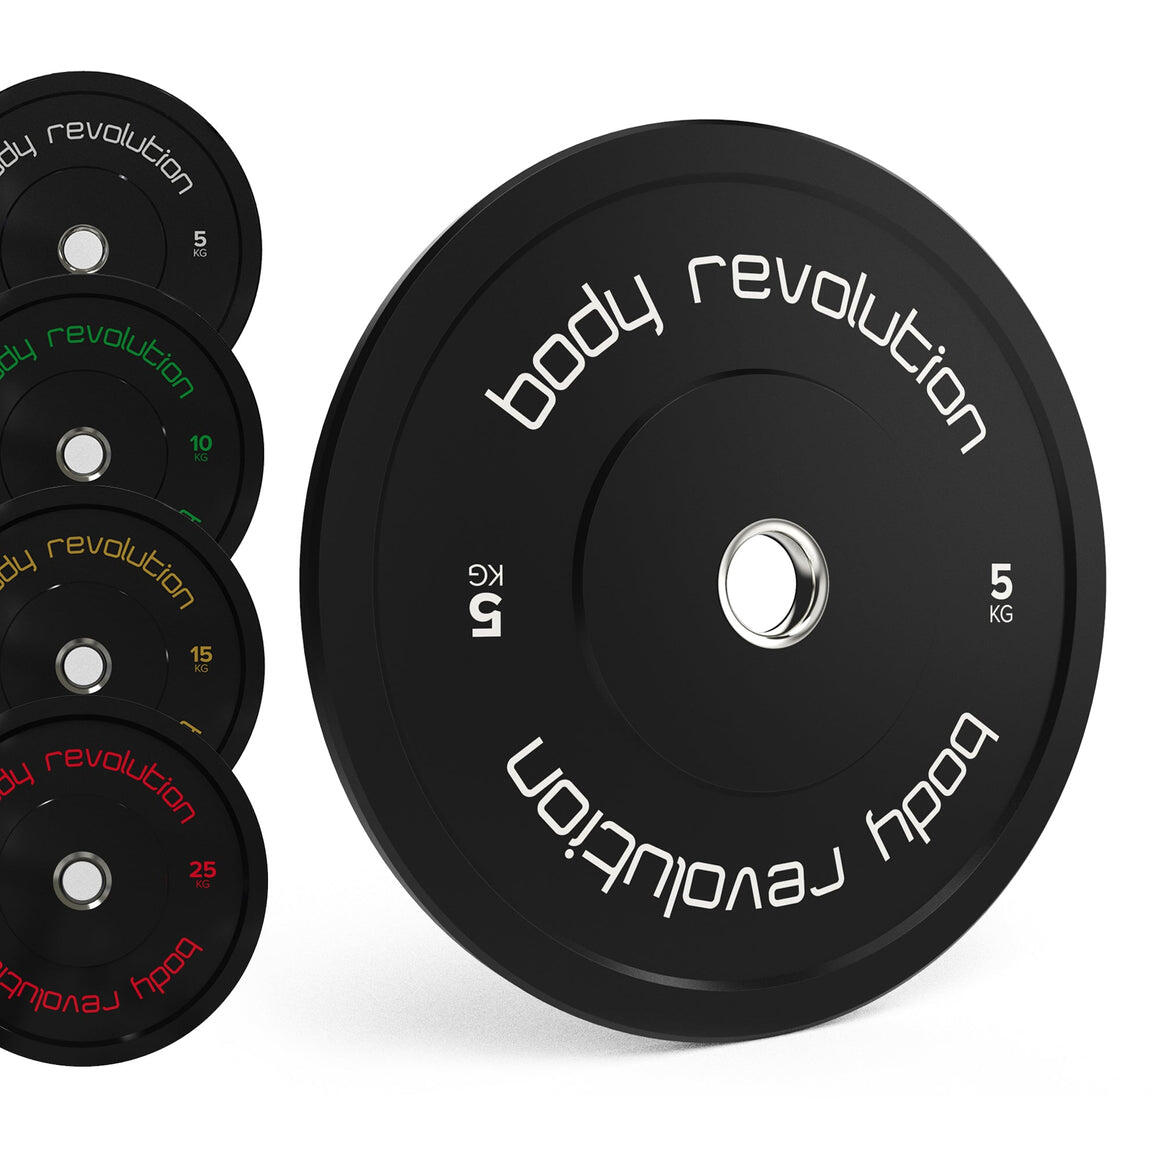 BODY REVOLUTION Olympic Bumper Plates - Black Rubber Coated Weight Plates - 5kg (Pair)